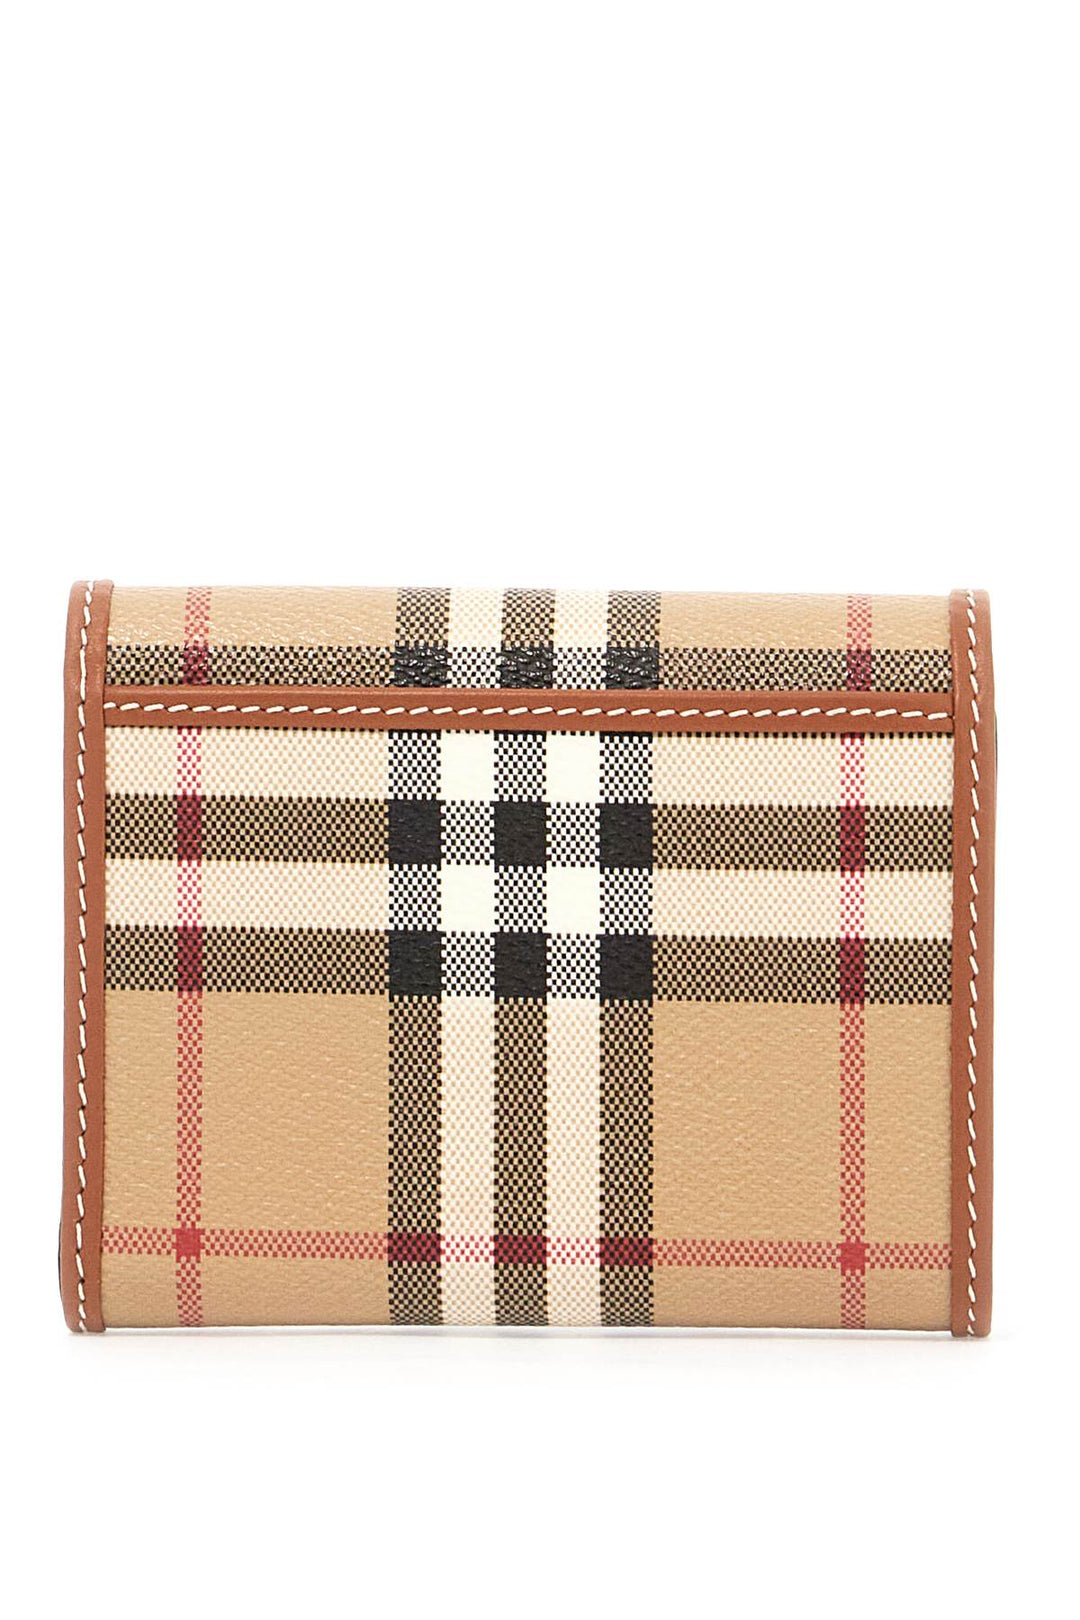 Burberry Book Wallet In Faux Leather   Beige